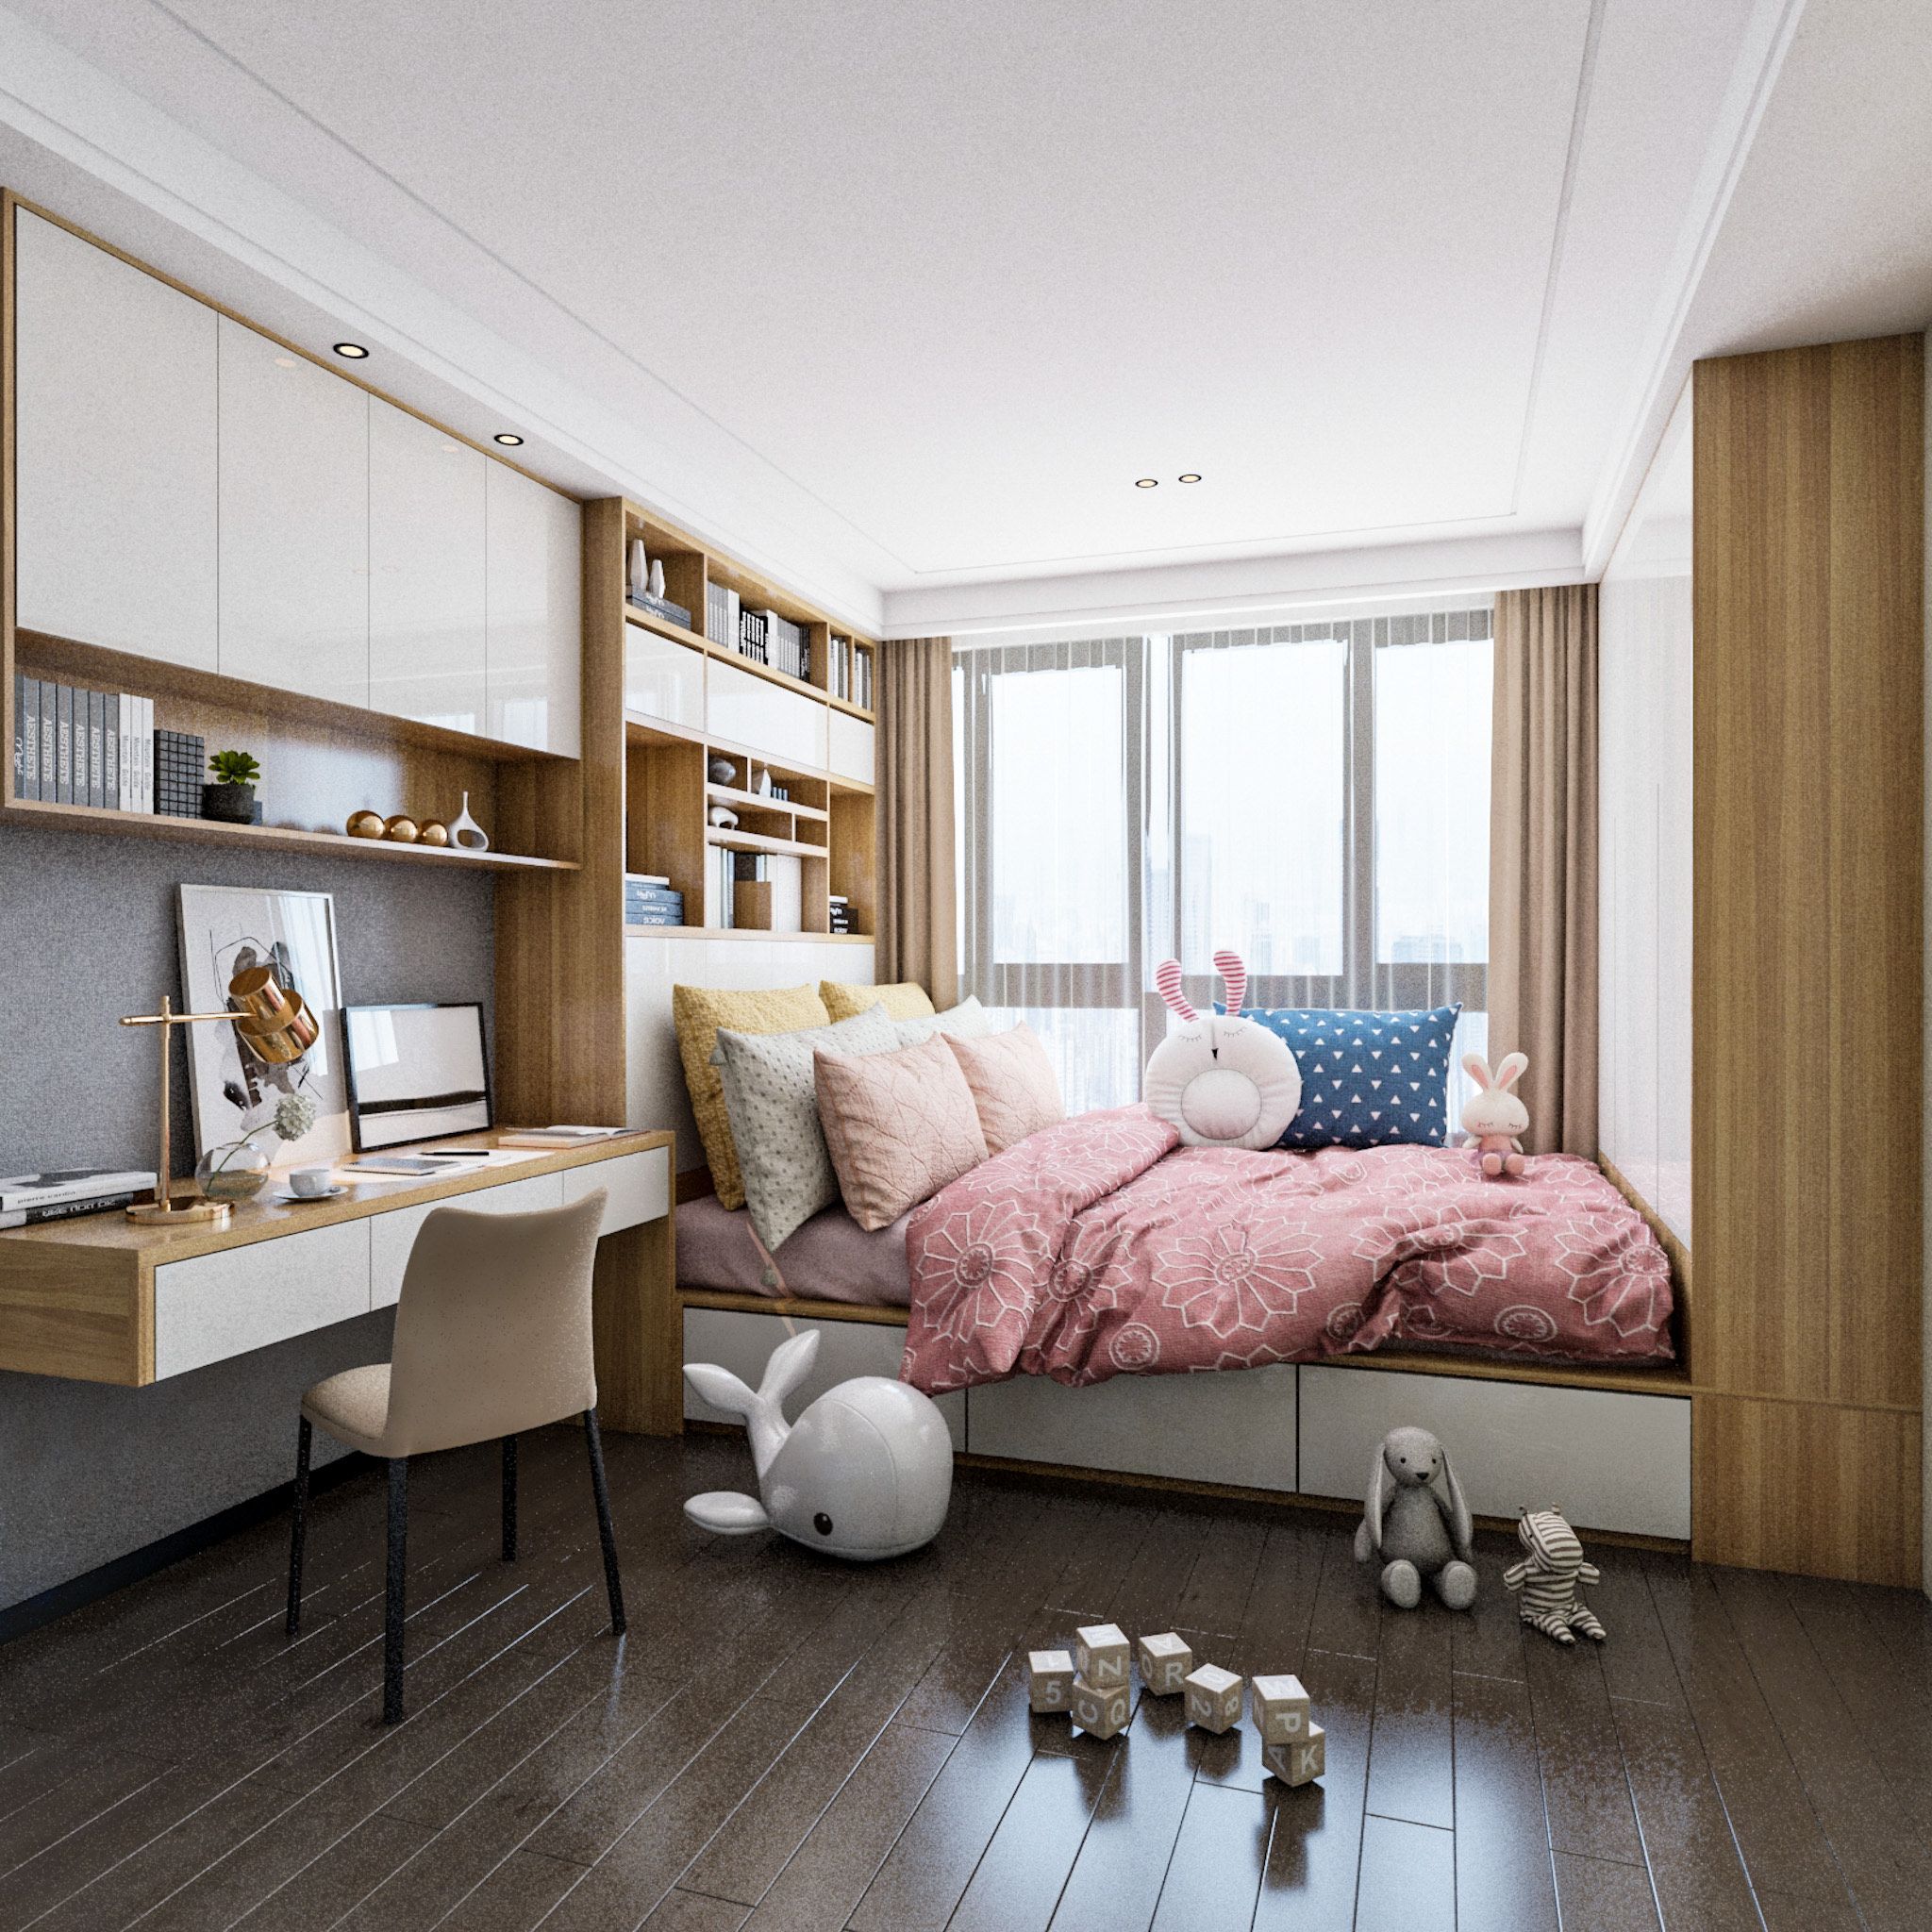 Contemporary Kids Room Design With A Study Unit And Loft Storage